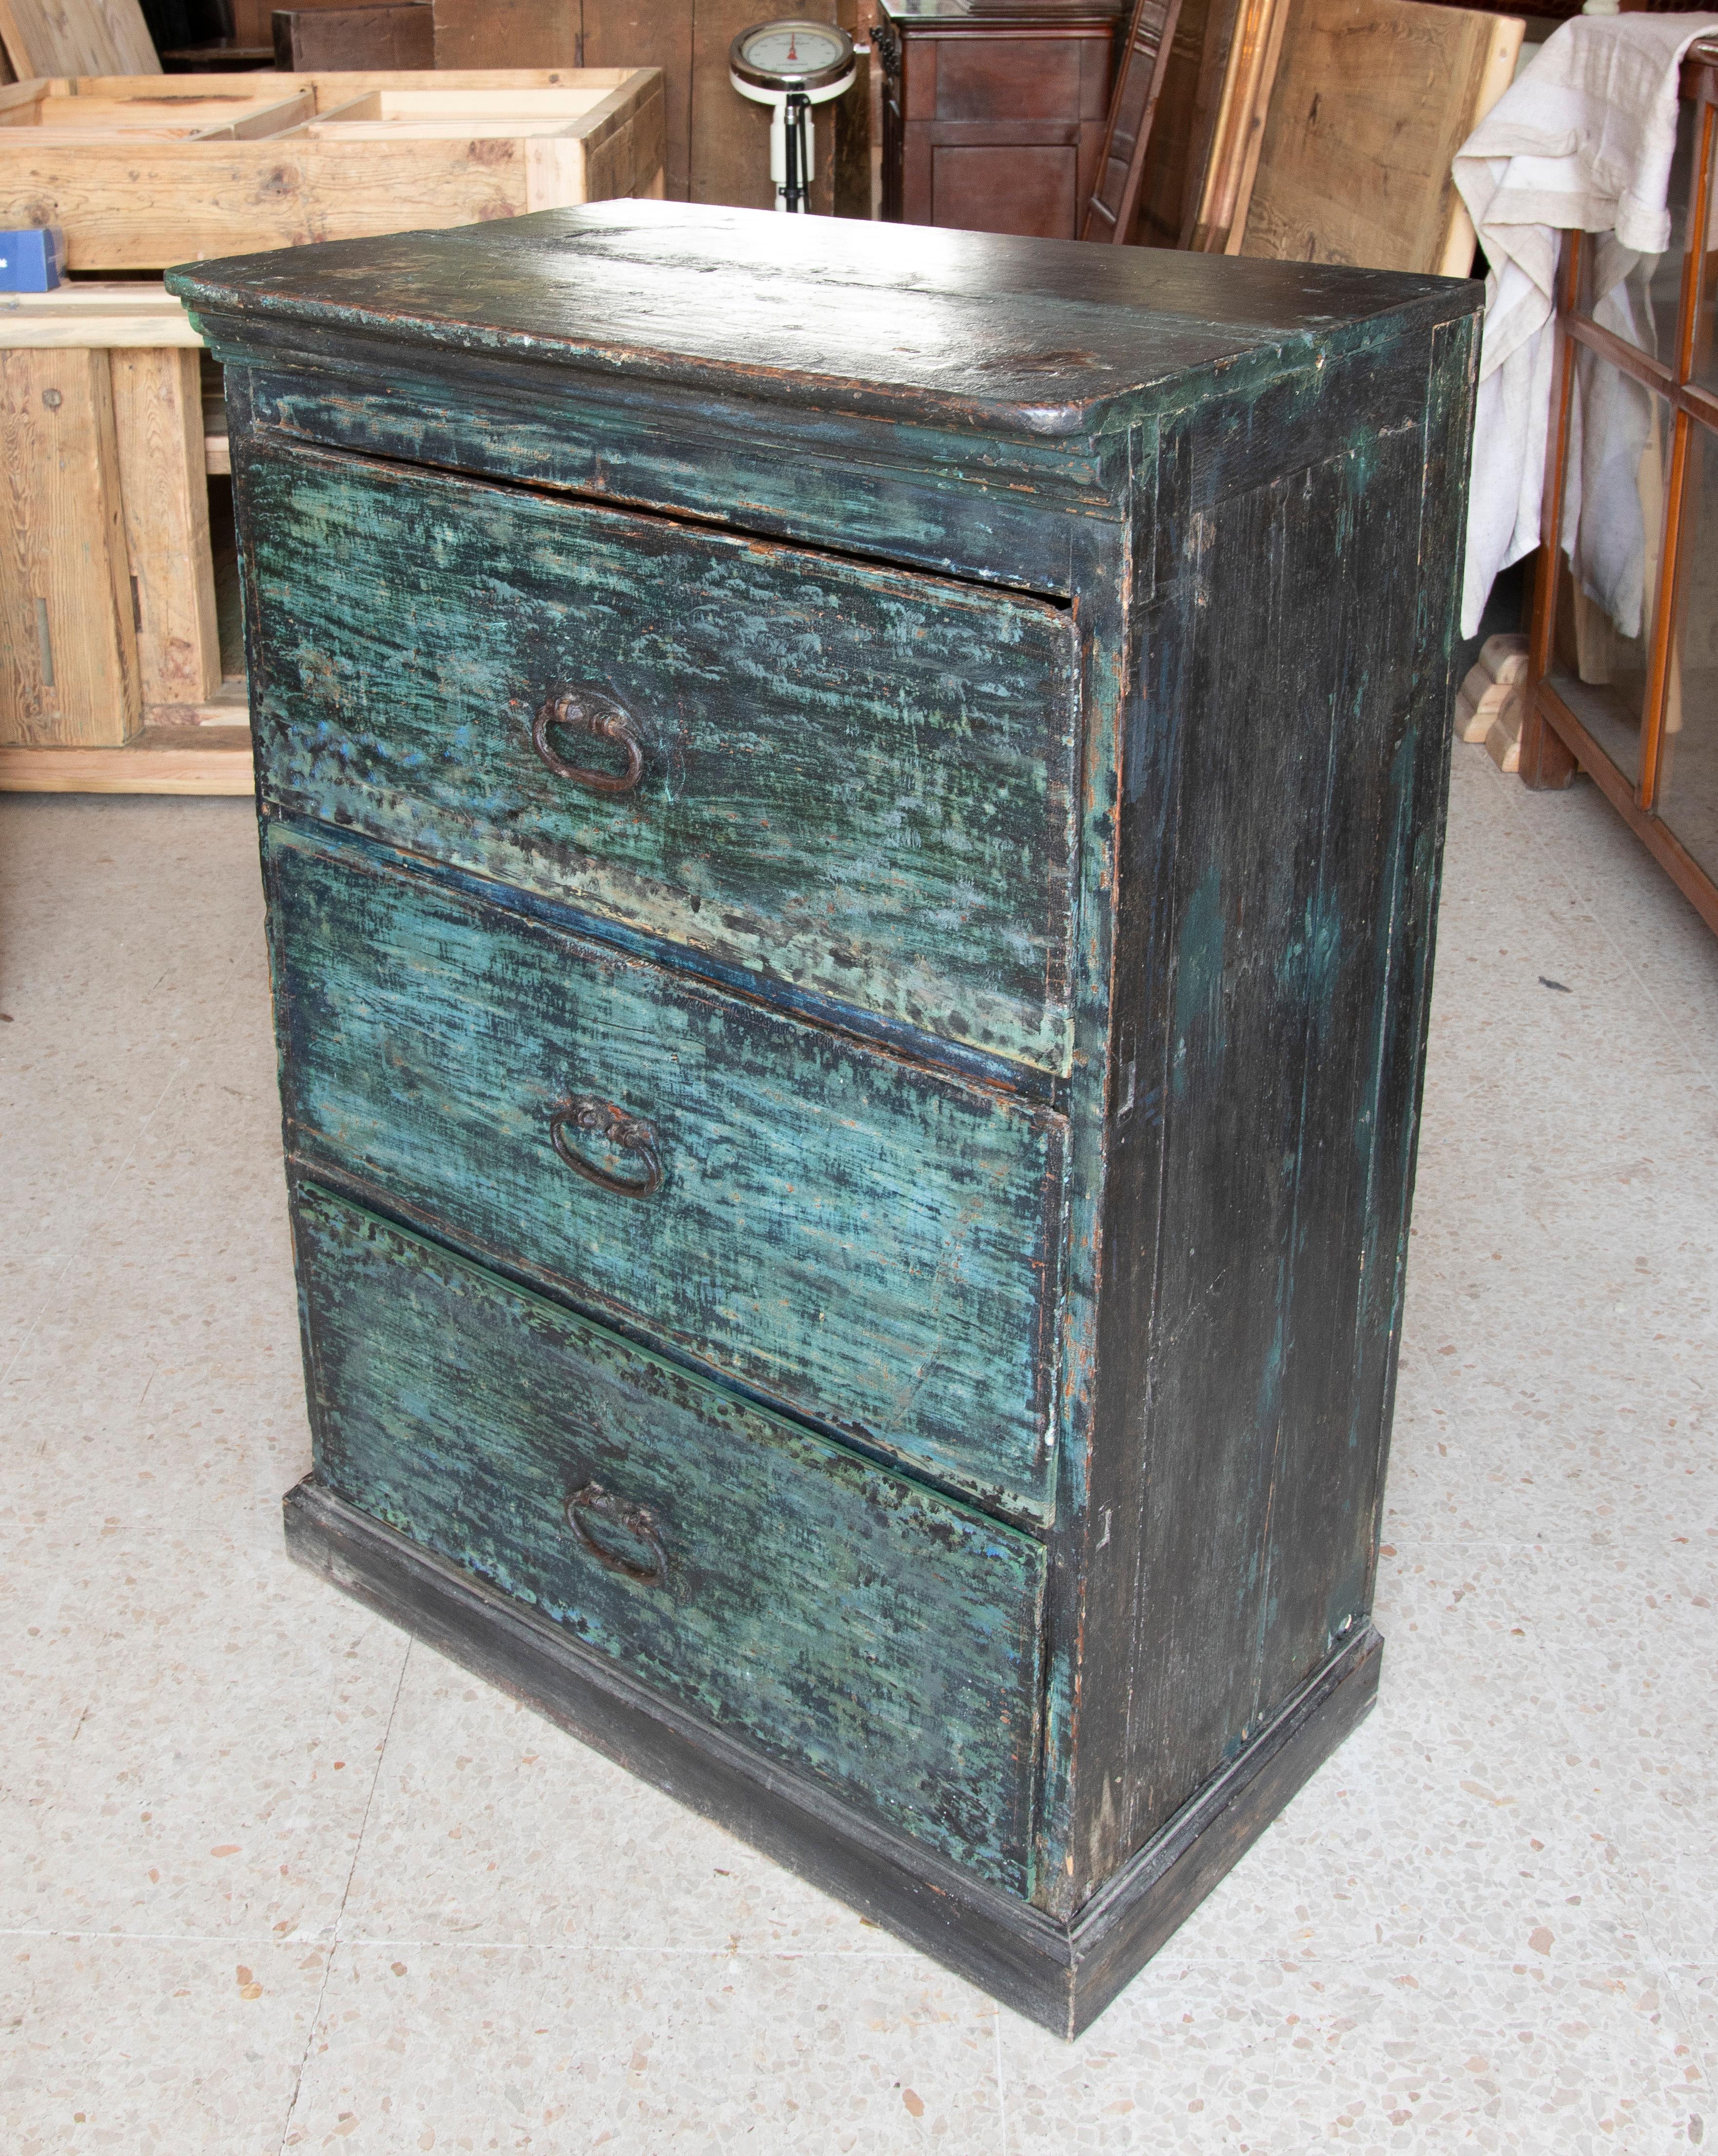 Chest of drawers in Polychromed wood in blue tones with iron handles.